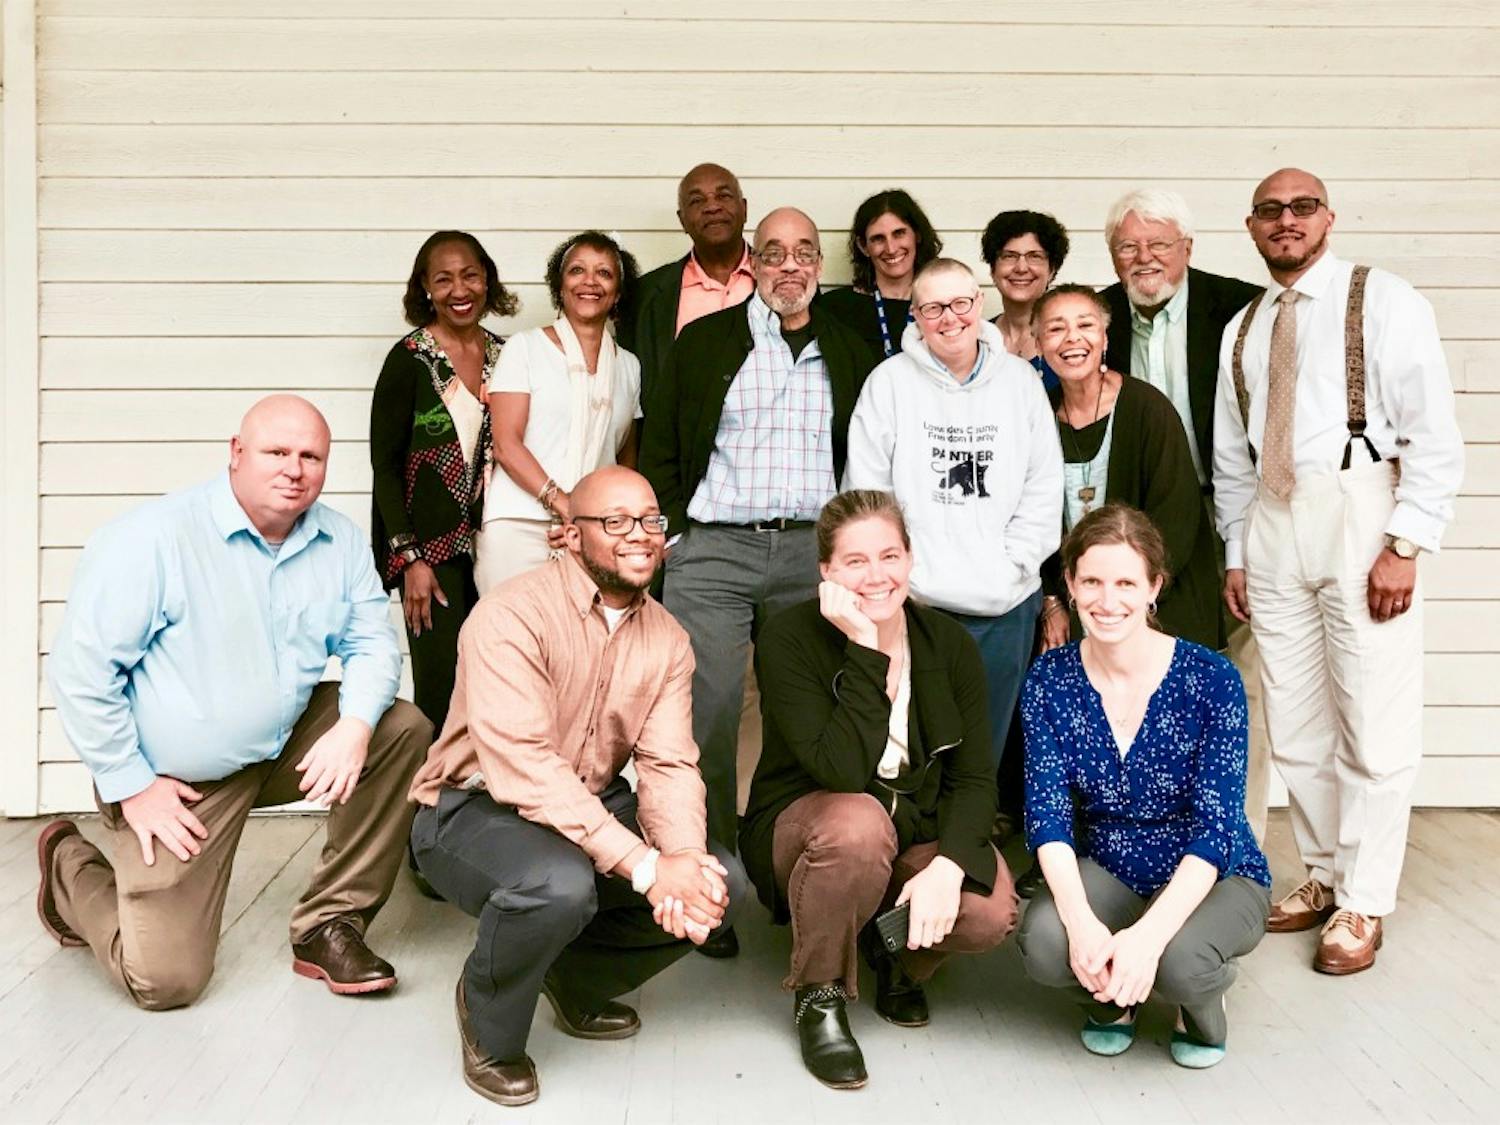 Project members from SNCC Legacy Project, Center for Documentary Studies, and Duke University Libraries. The project, which created an online archive and activism platform, is a product of a five-year partnership between SNCC, the documentary center and the libraries. Photo courtesy of Wesley Hogan.